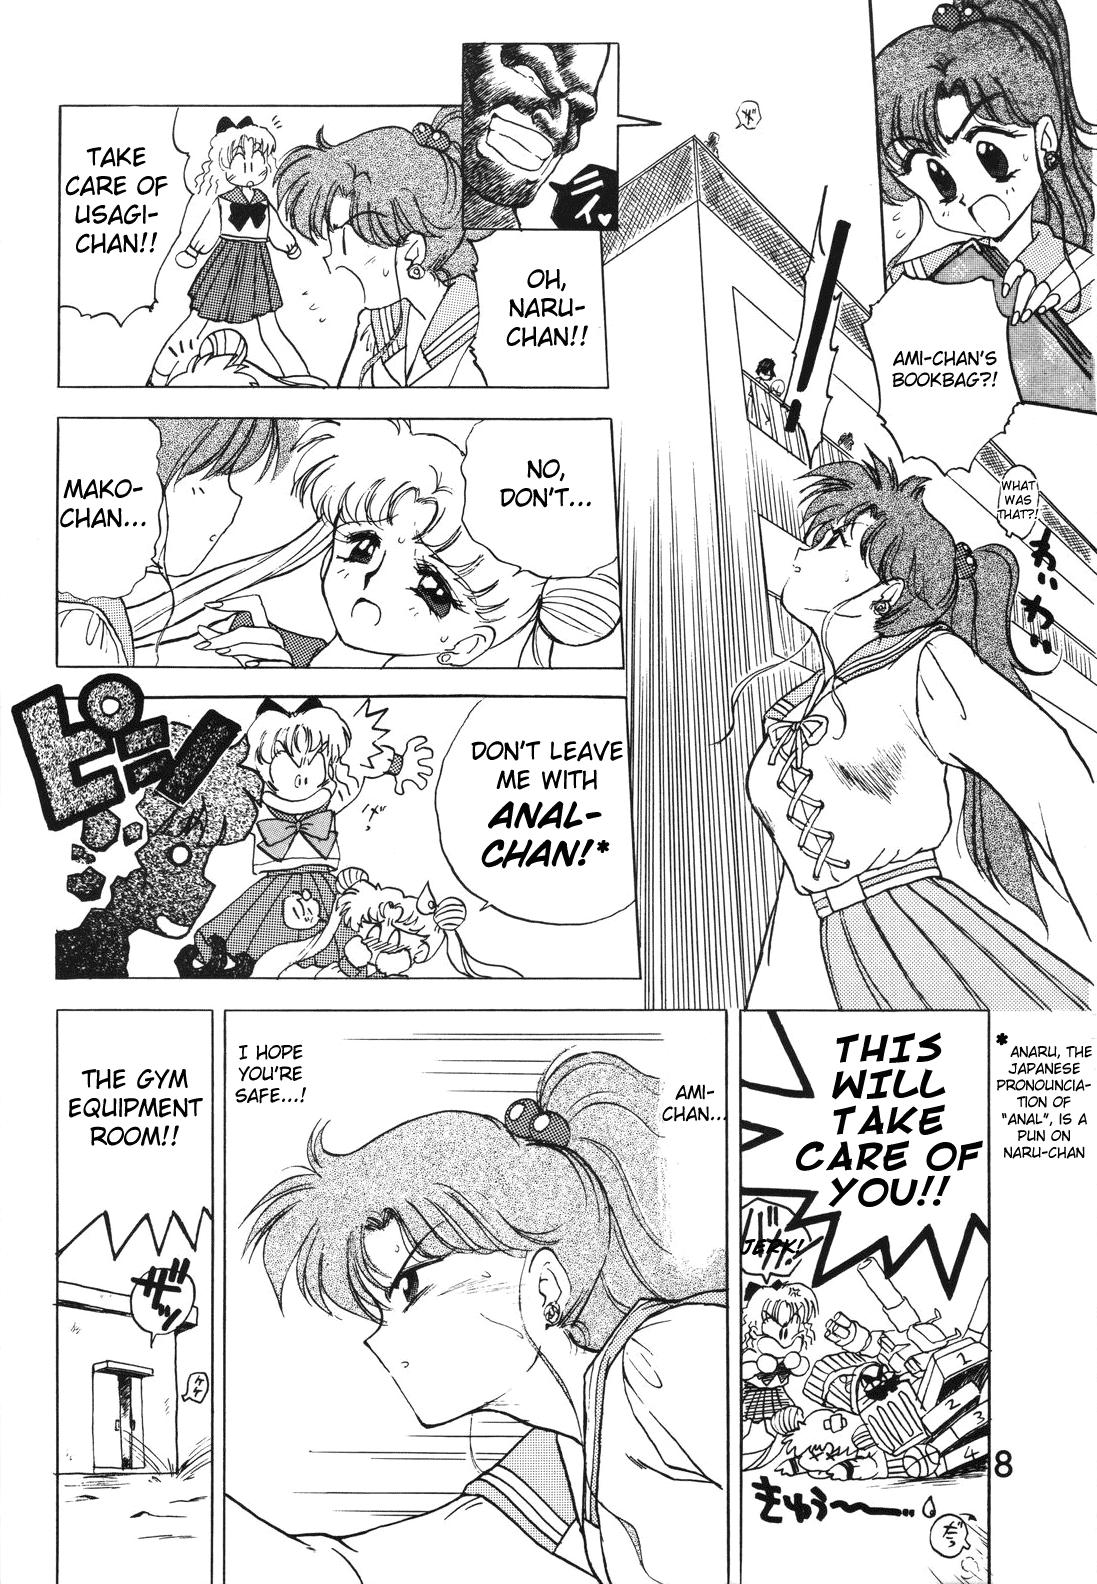 1080p Submission Jupiter Plus - Sailor moon Fuck - Page 10